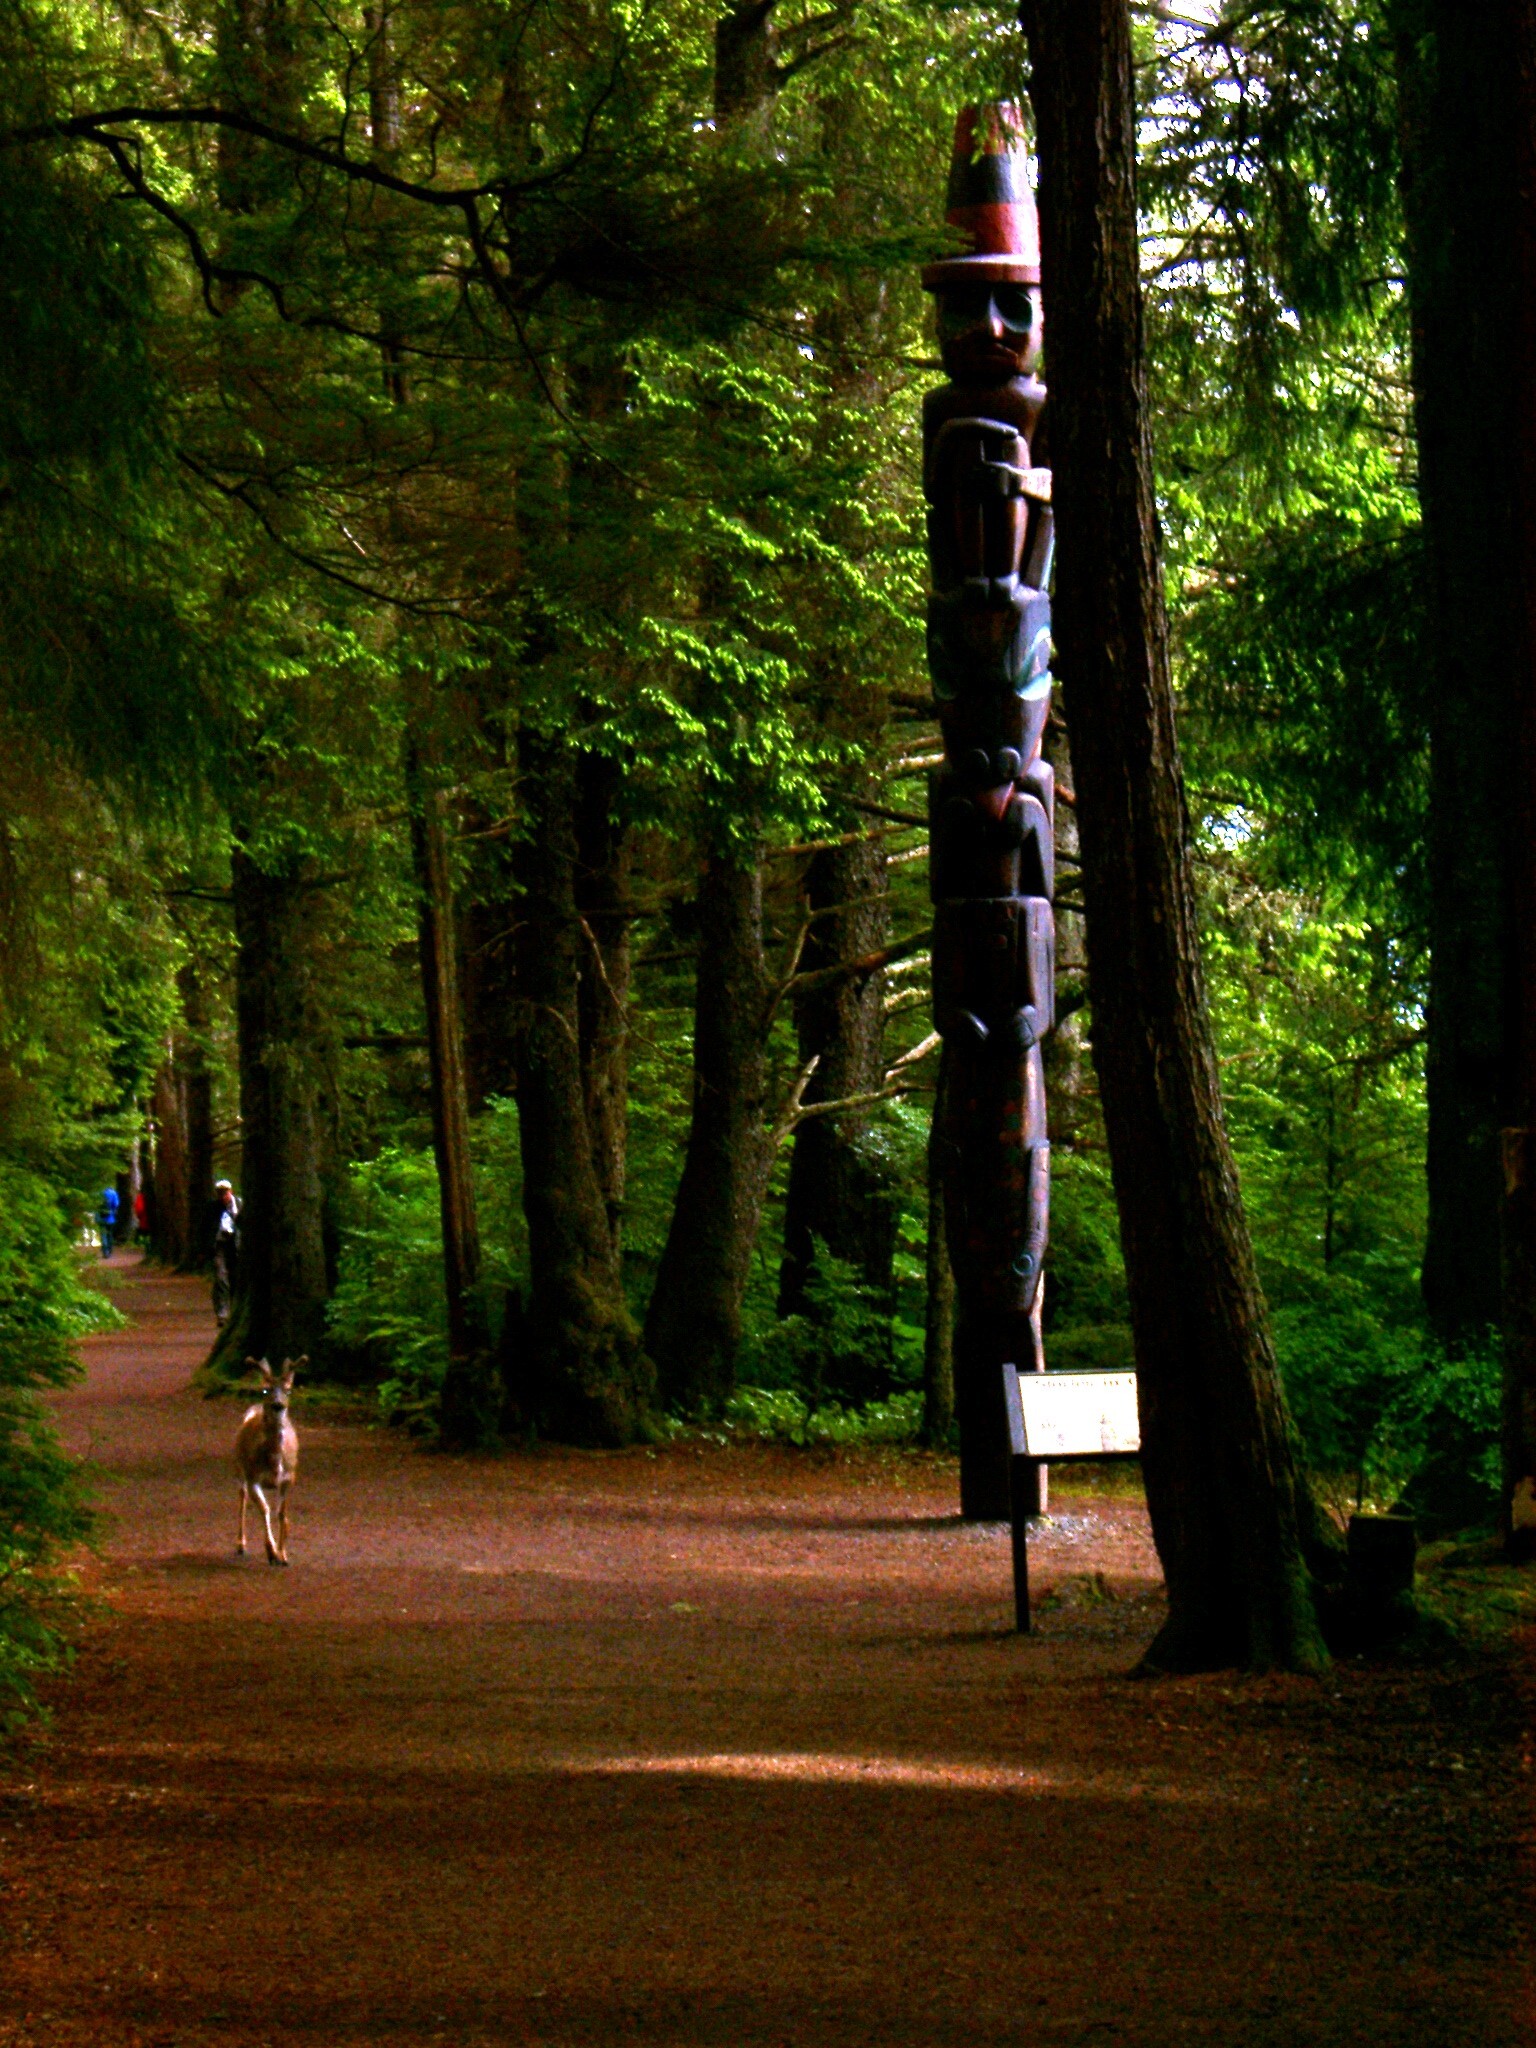 A deer on a park trail next to a totem pole